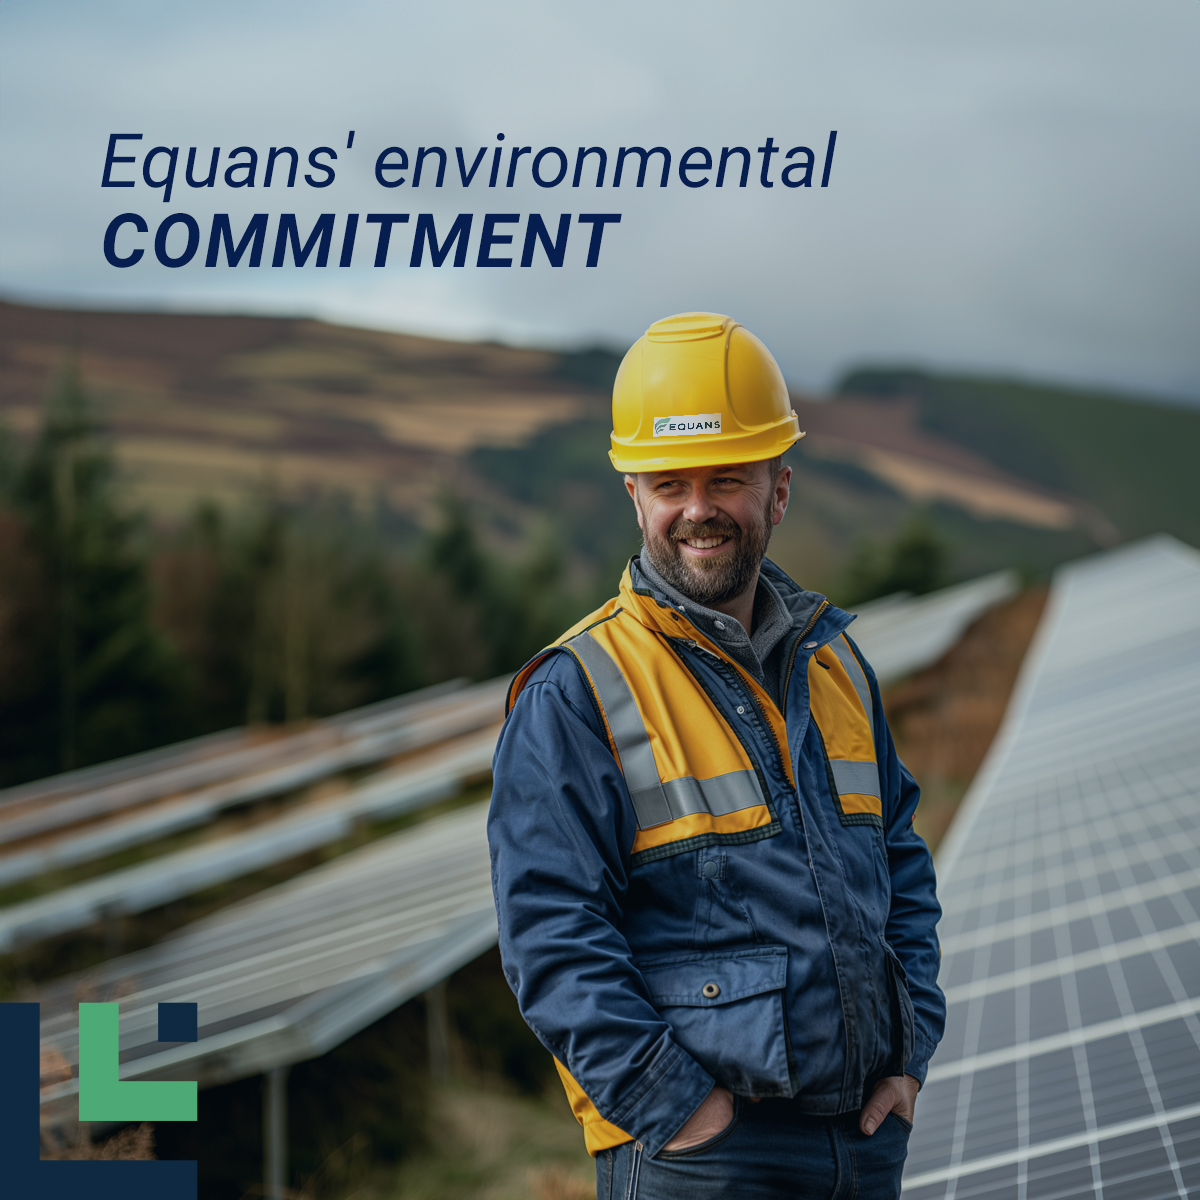 🌱 At #Equans, we're committed to reducing our #carbonemissions by 42% (Scope 1&2) by 2030, switching to electric vehicles and optimising energy use. 

We also aim to reduce our emissions by 52% (scope 3) by 2050, with sustainable procurement and supplier engagement.